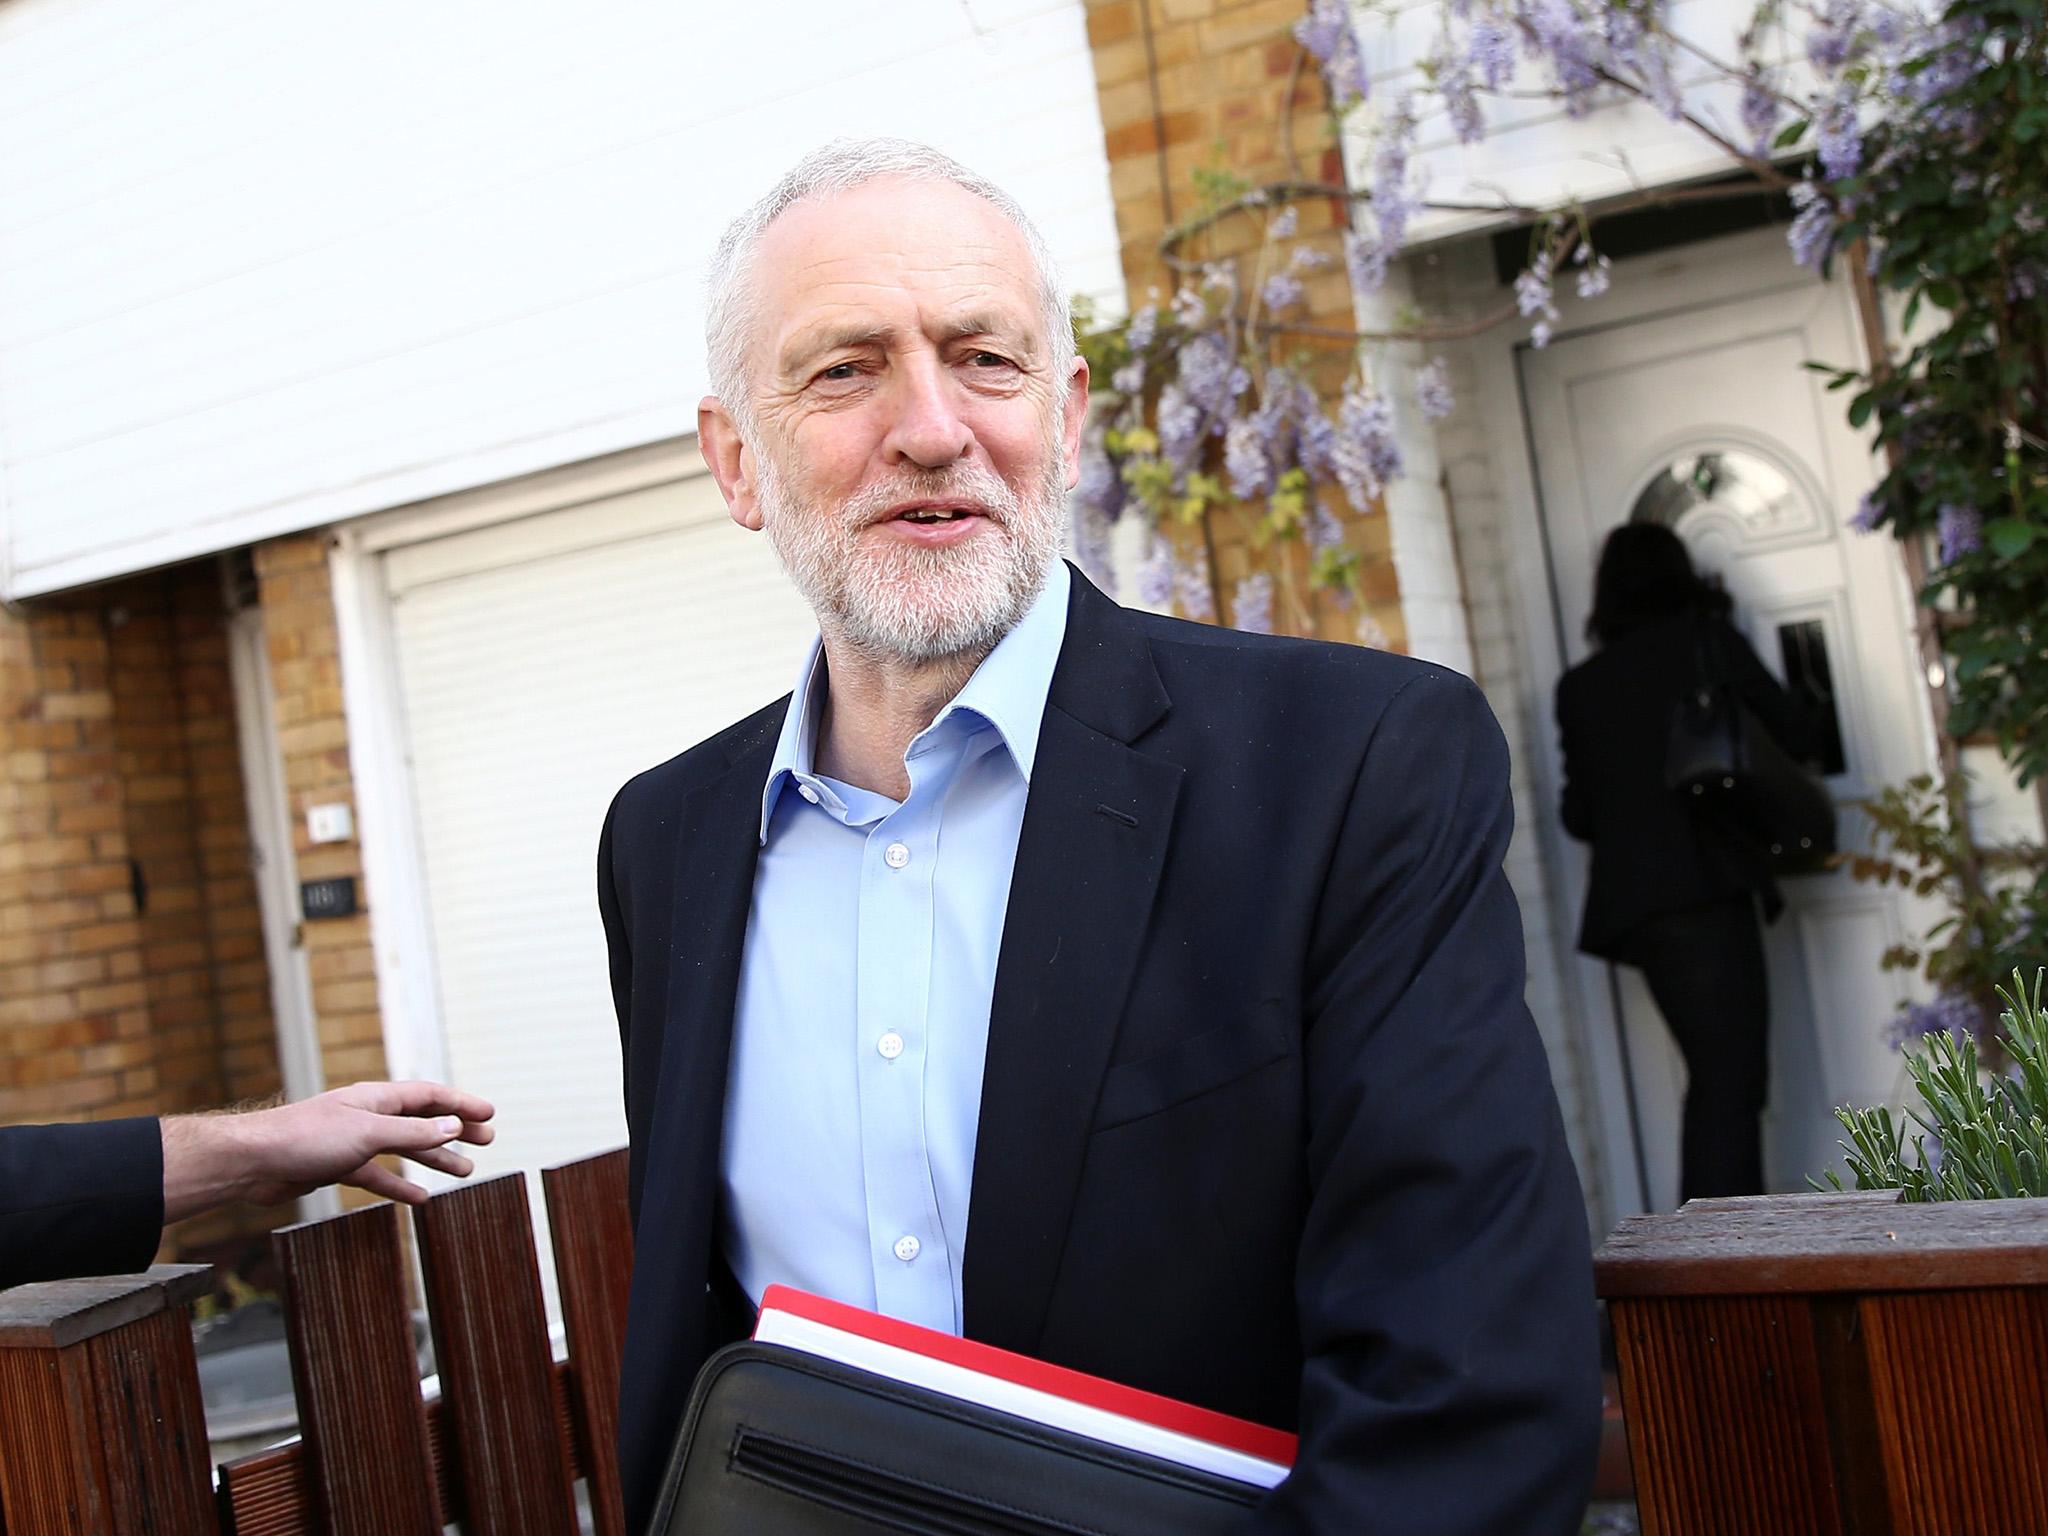 Despite his unpopularity, Corbyn may still cling on after the general election